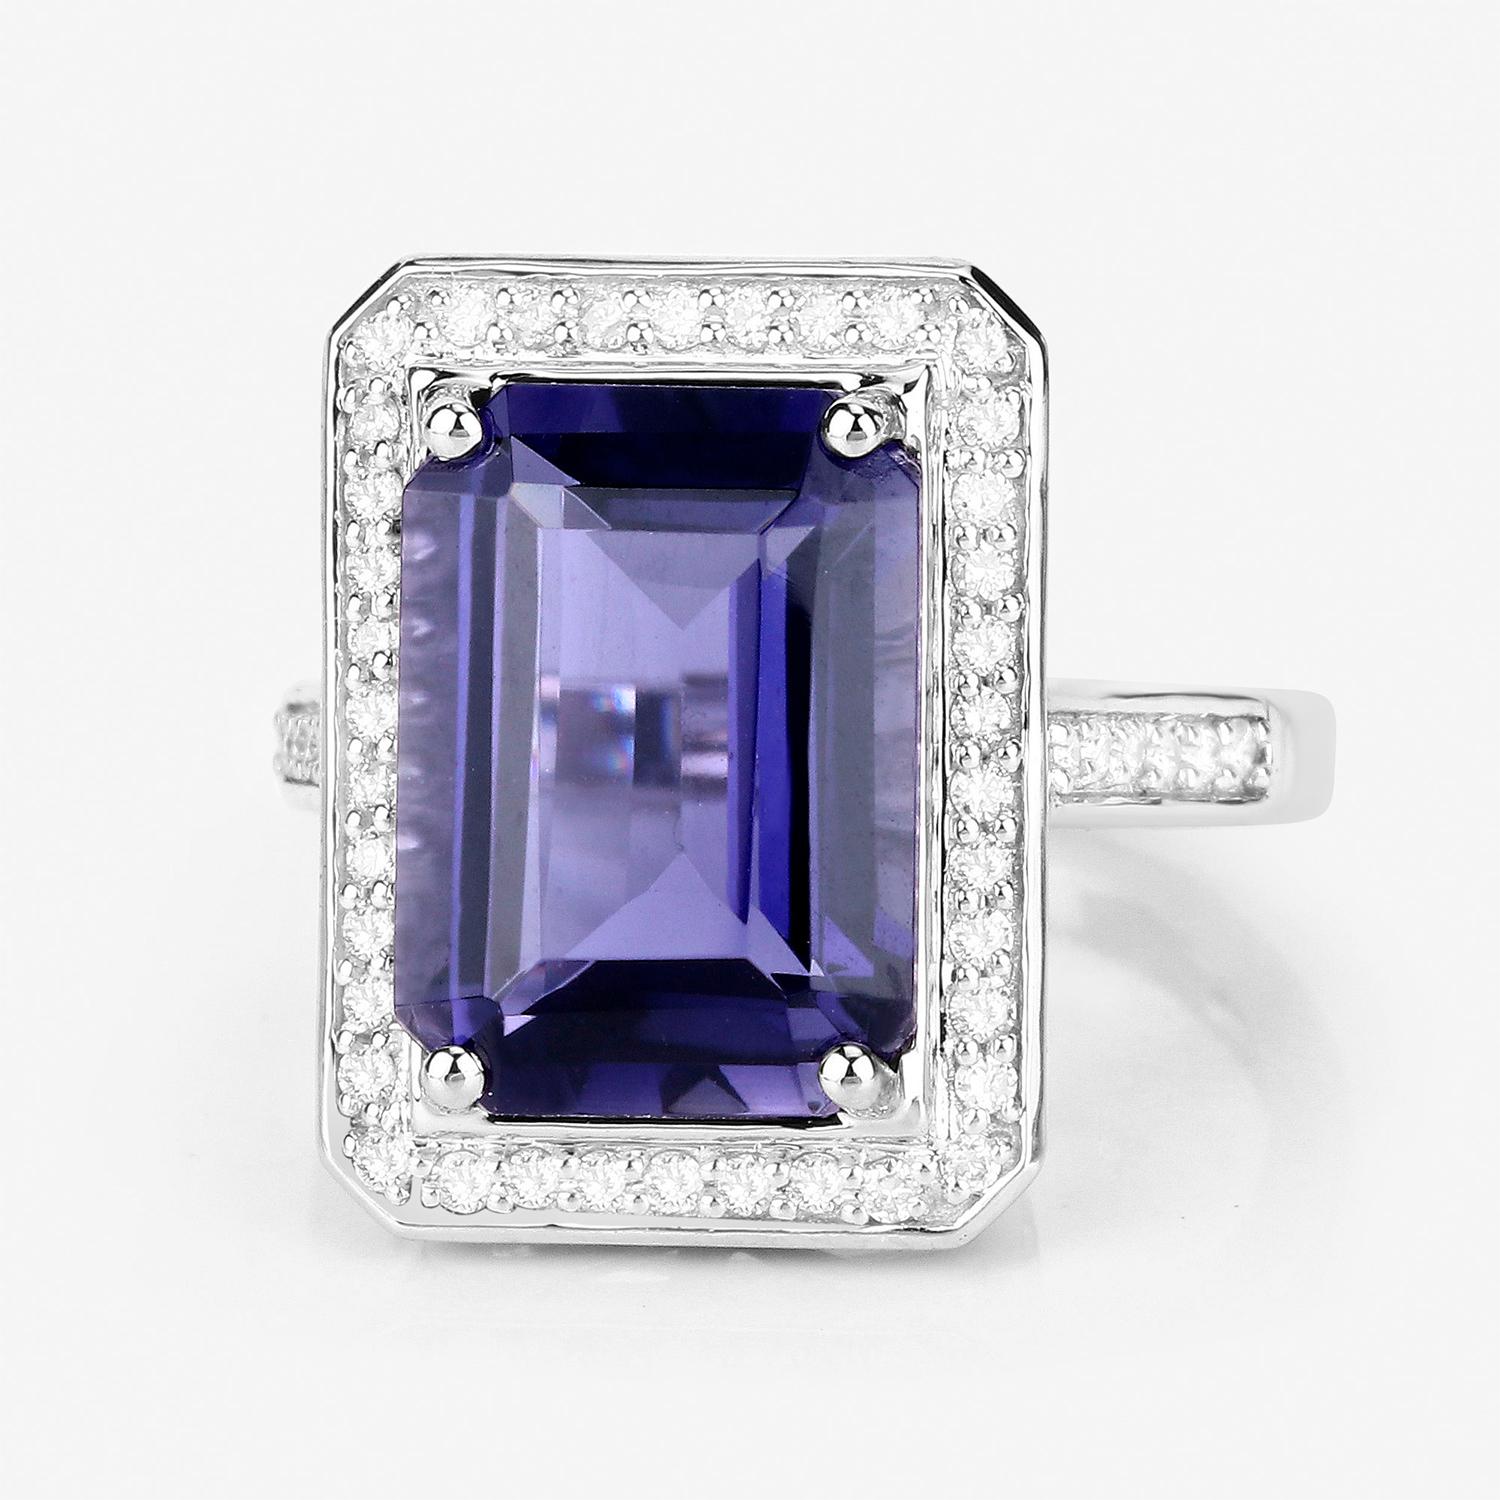 Iolite Cocktail Ring Diamond Halo 6.45 Carats 14K White Gold In Excellent Condition For Sale In Laguna Niguel, CA